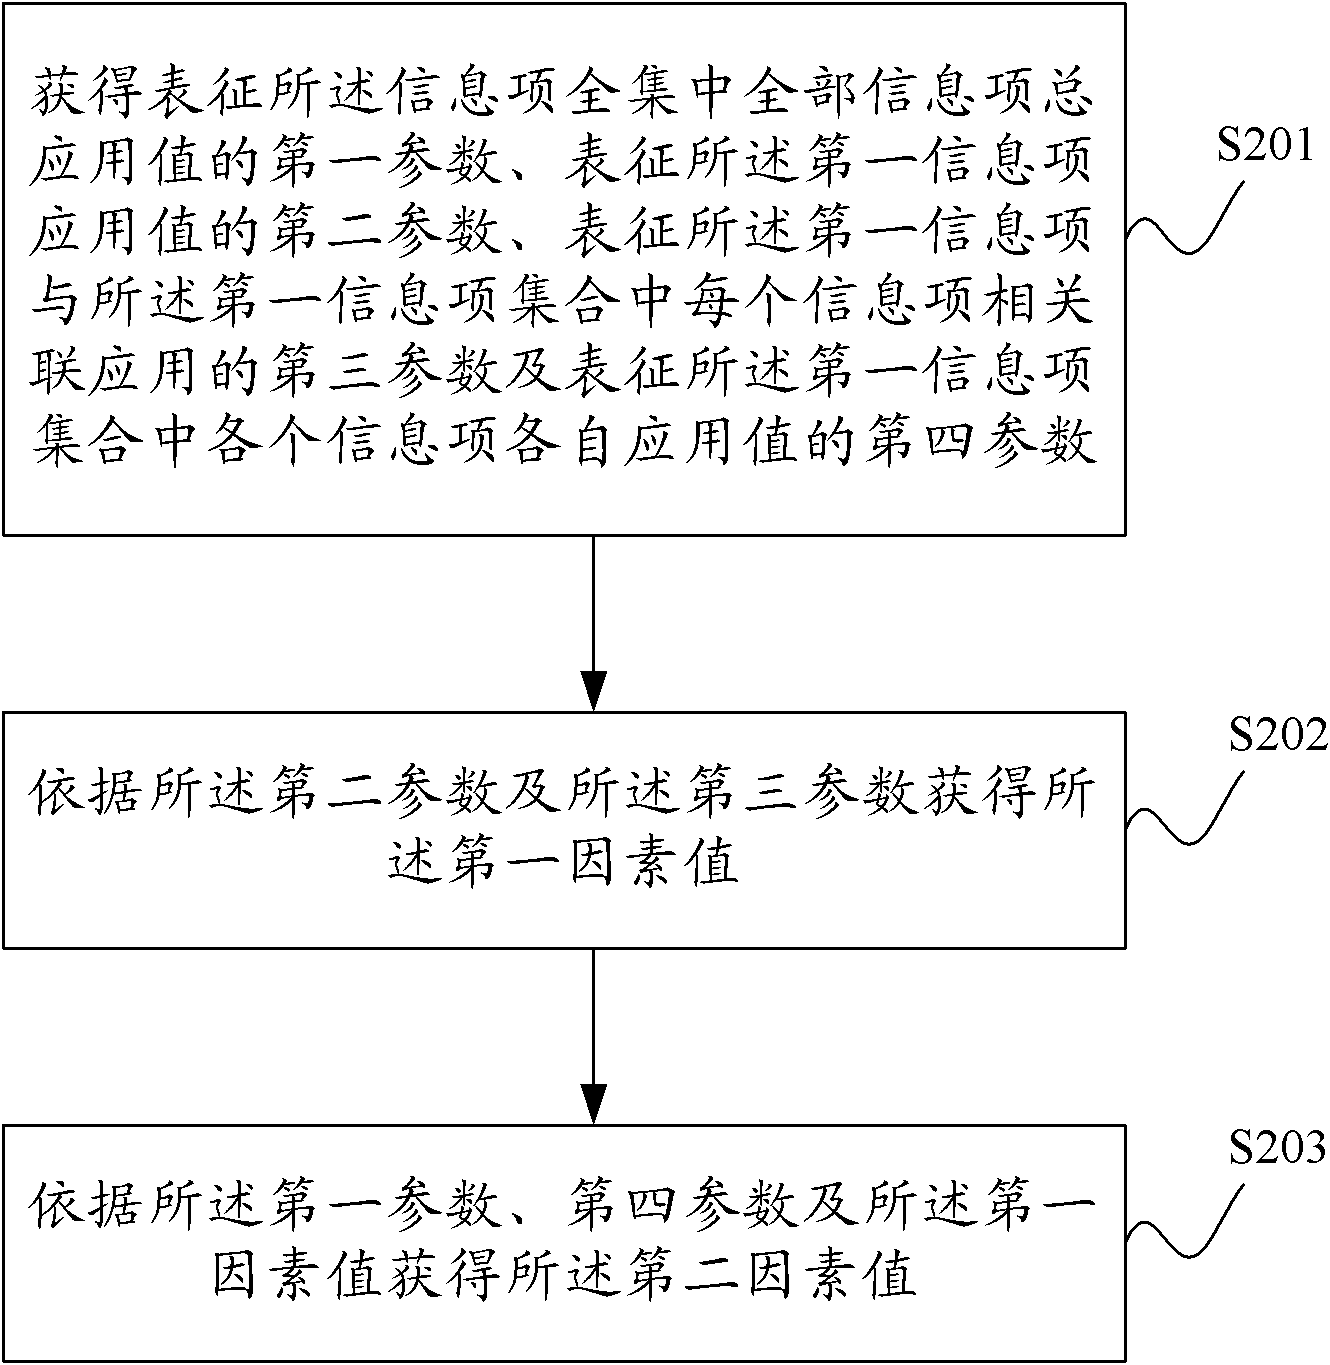 Information item recommendation method and system